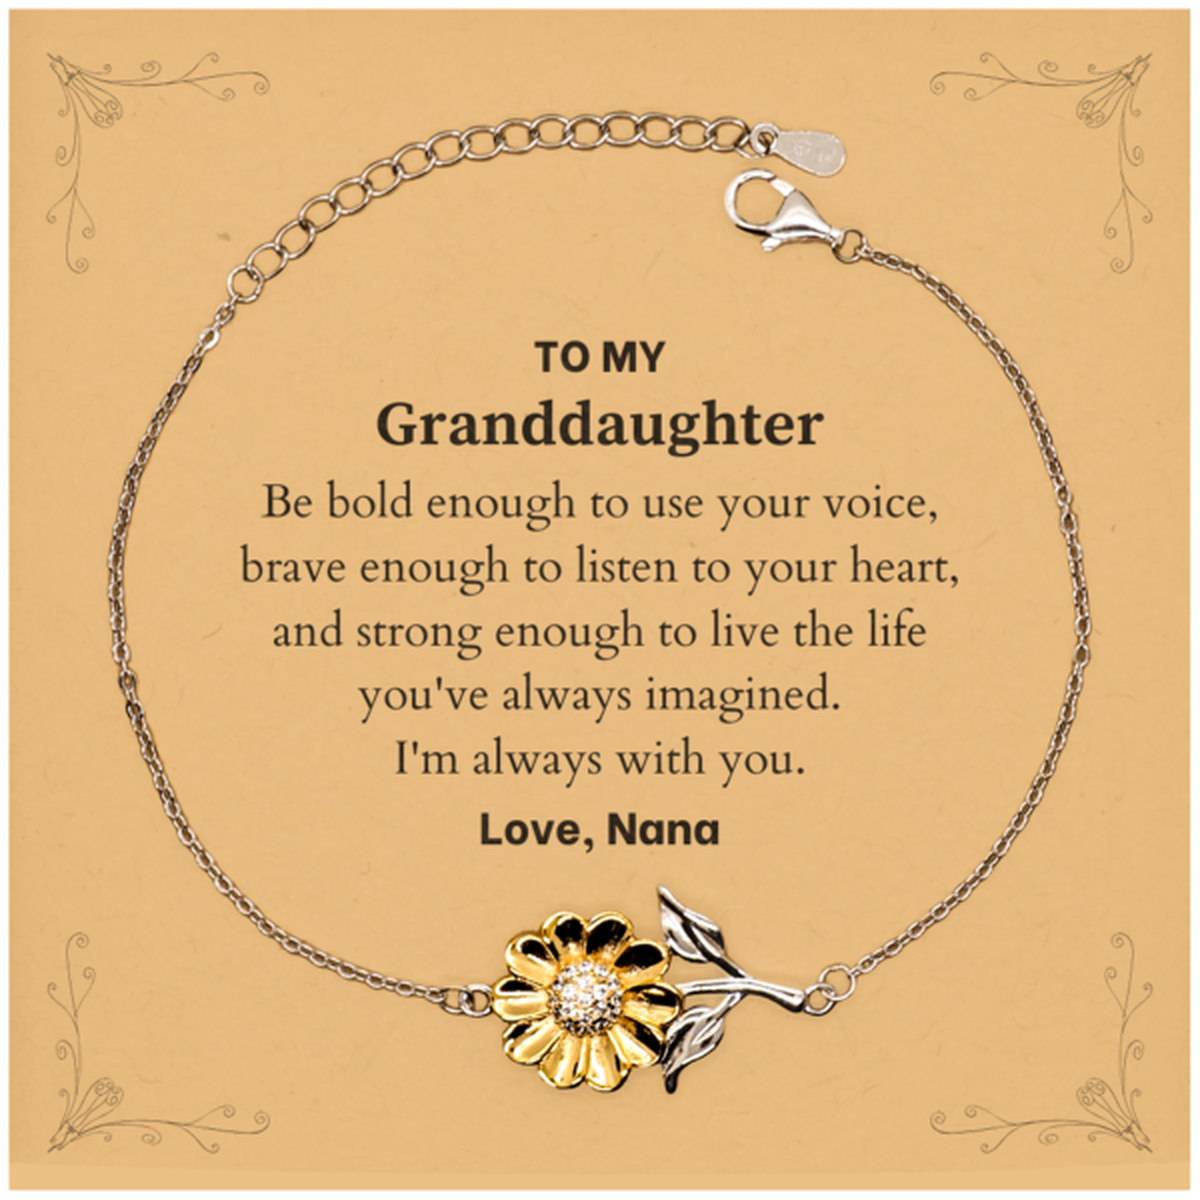 Keepsake Granddaughter Sunflower Bracelet Gift Idea Graduation Christmas Birthday Granddaughter from Nana, Granddaughter Be bold enough to use your voice, brave enough to listen to your heart. Love, Nana